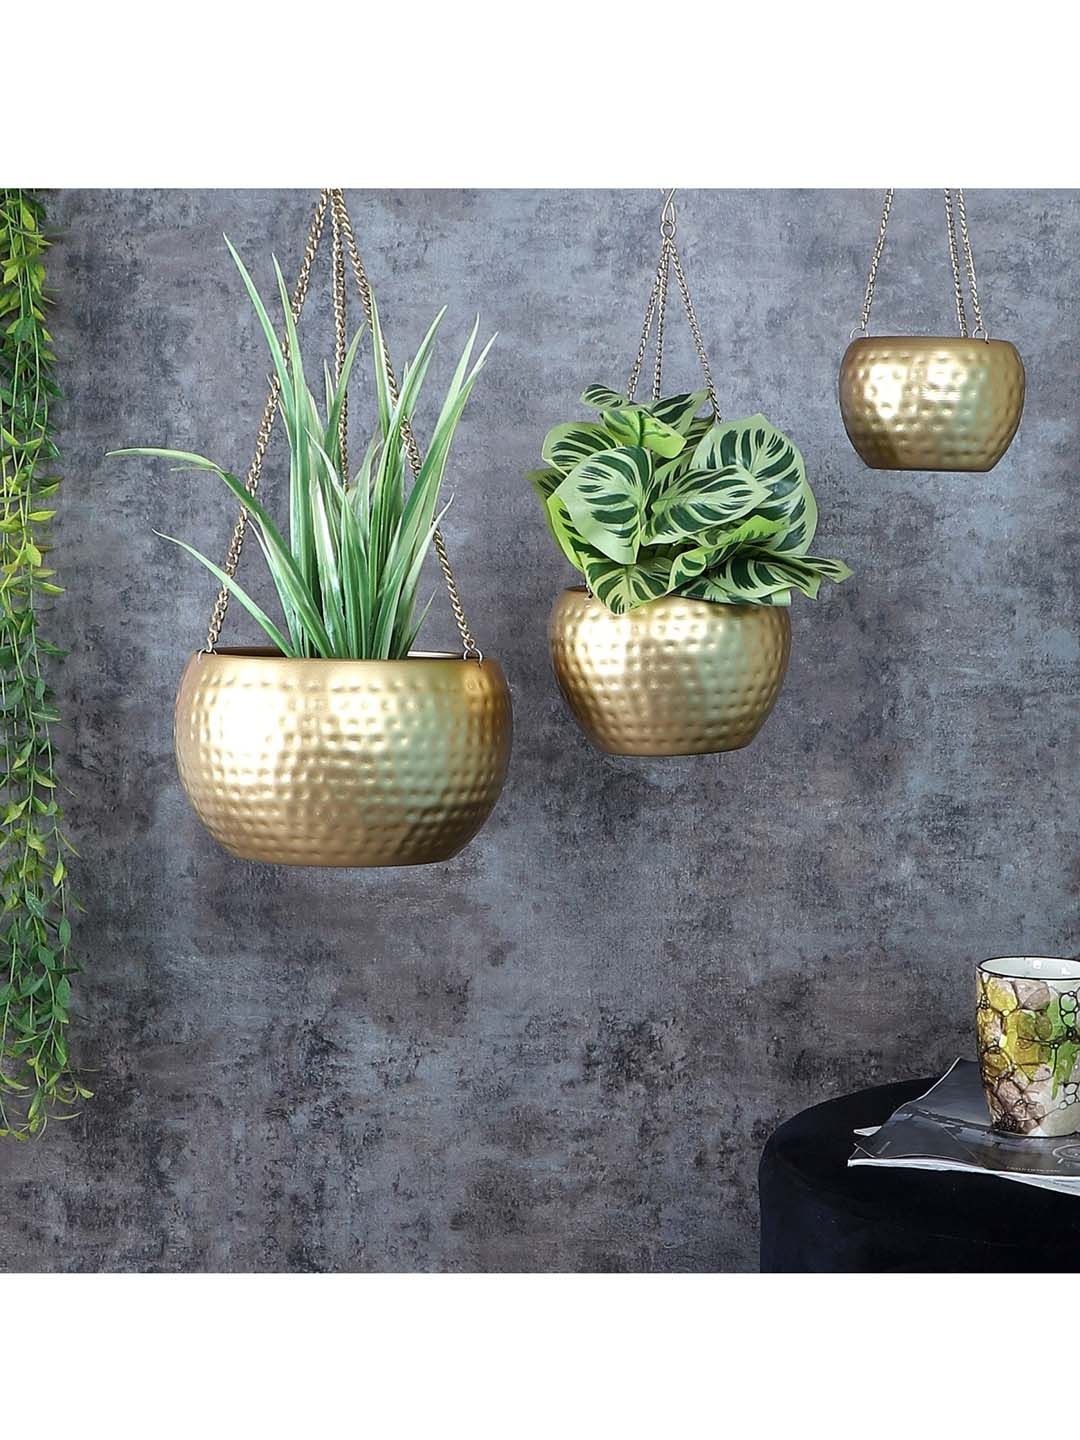 Amaya Decors Set Of 3 Gold-Toned Metal Planters Price in India